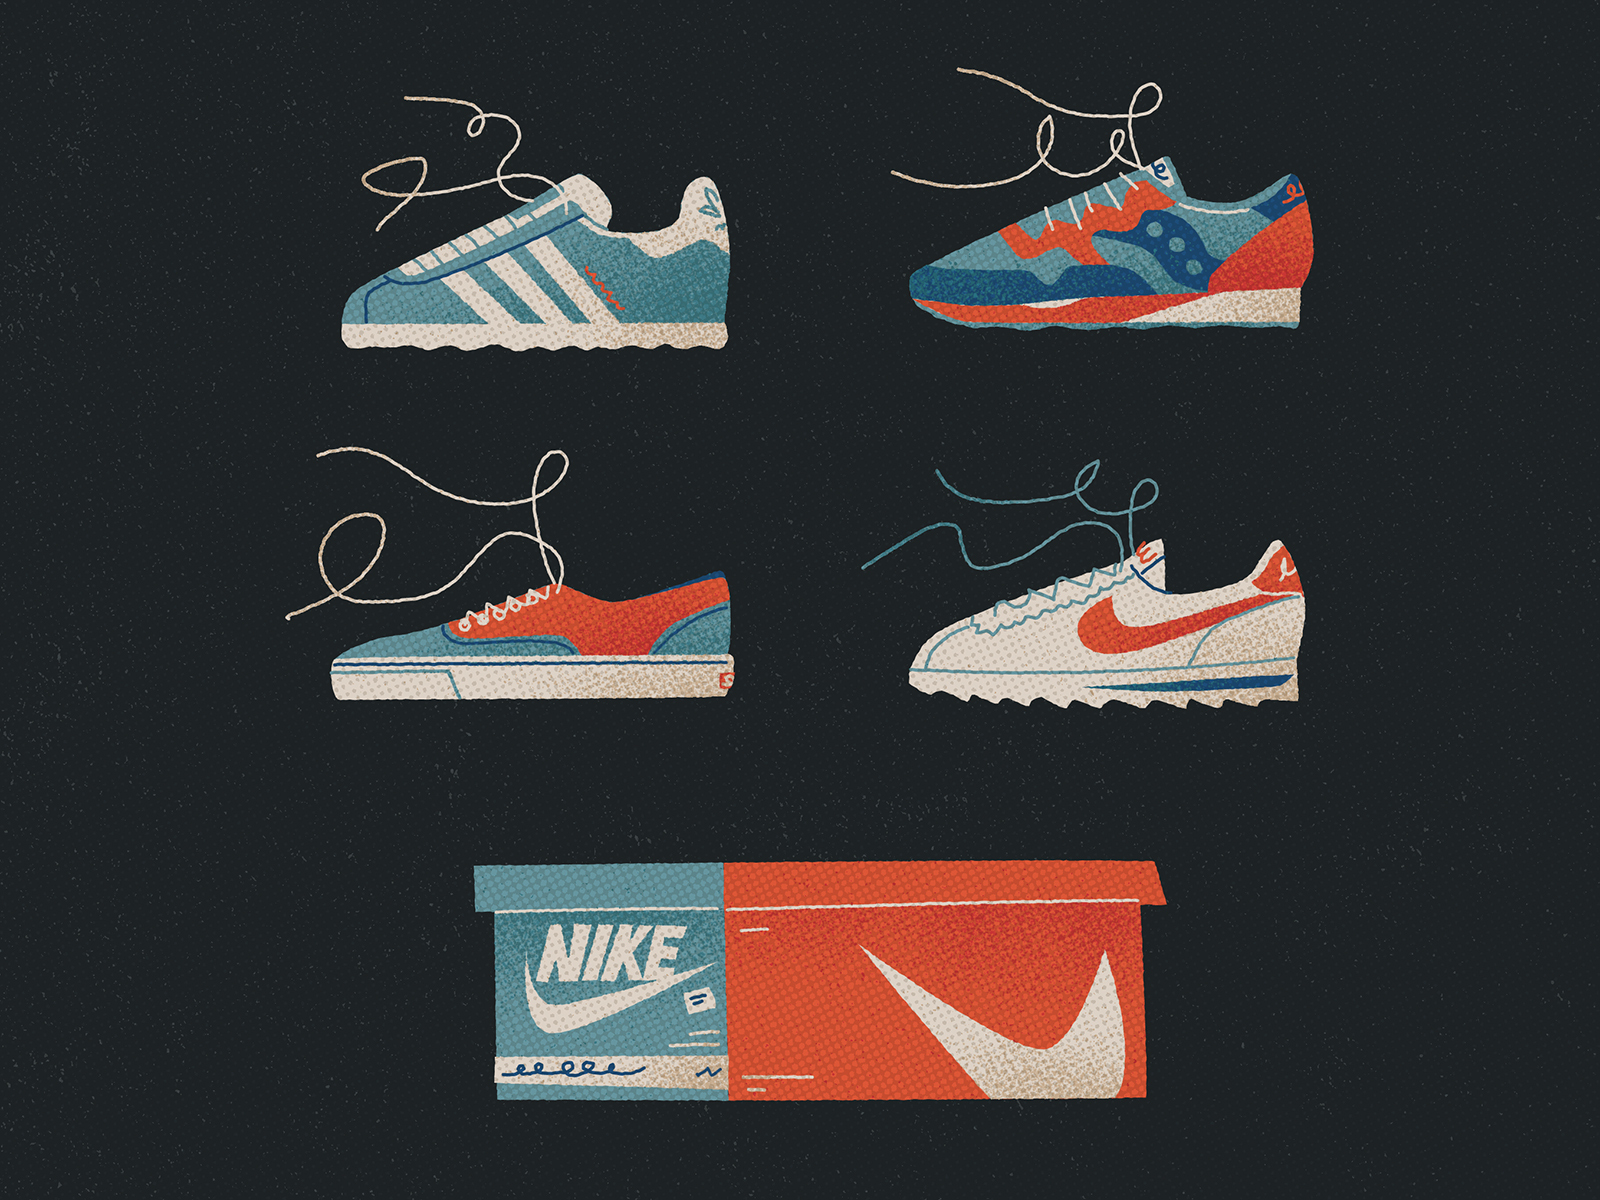 Sneaky Sneaks addidas drawing graphic halftones illustration laces new balance nike nostalgic packaging retro shoes sneakers texture vans vector vintage